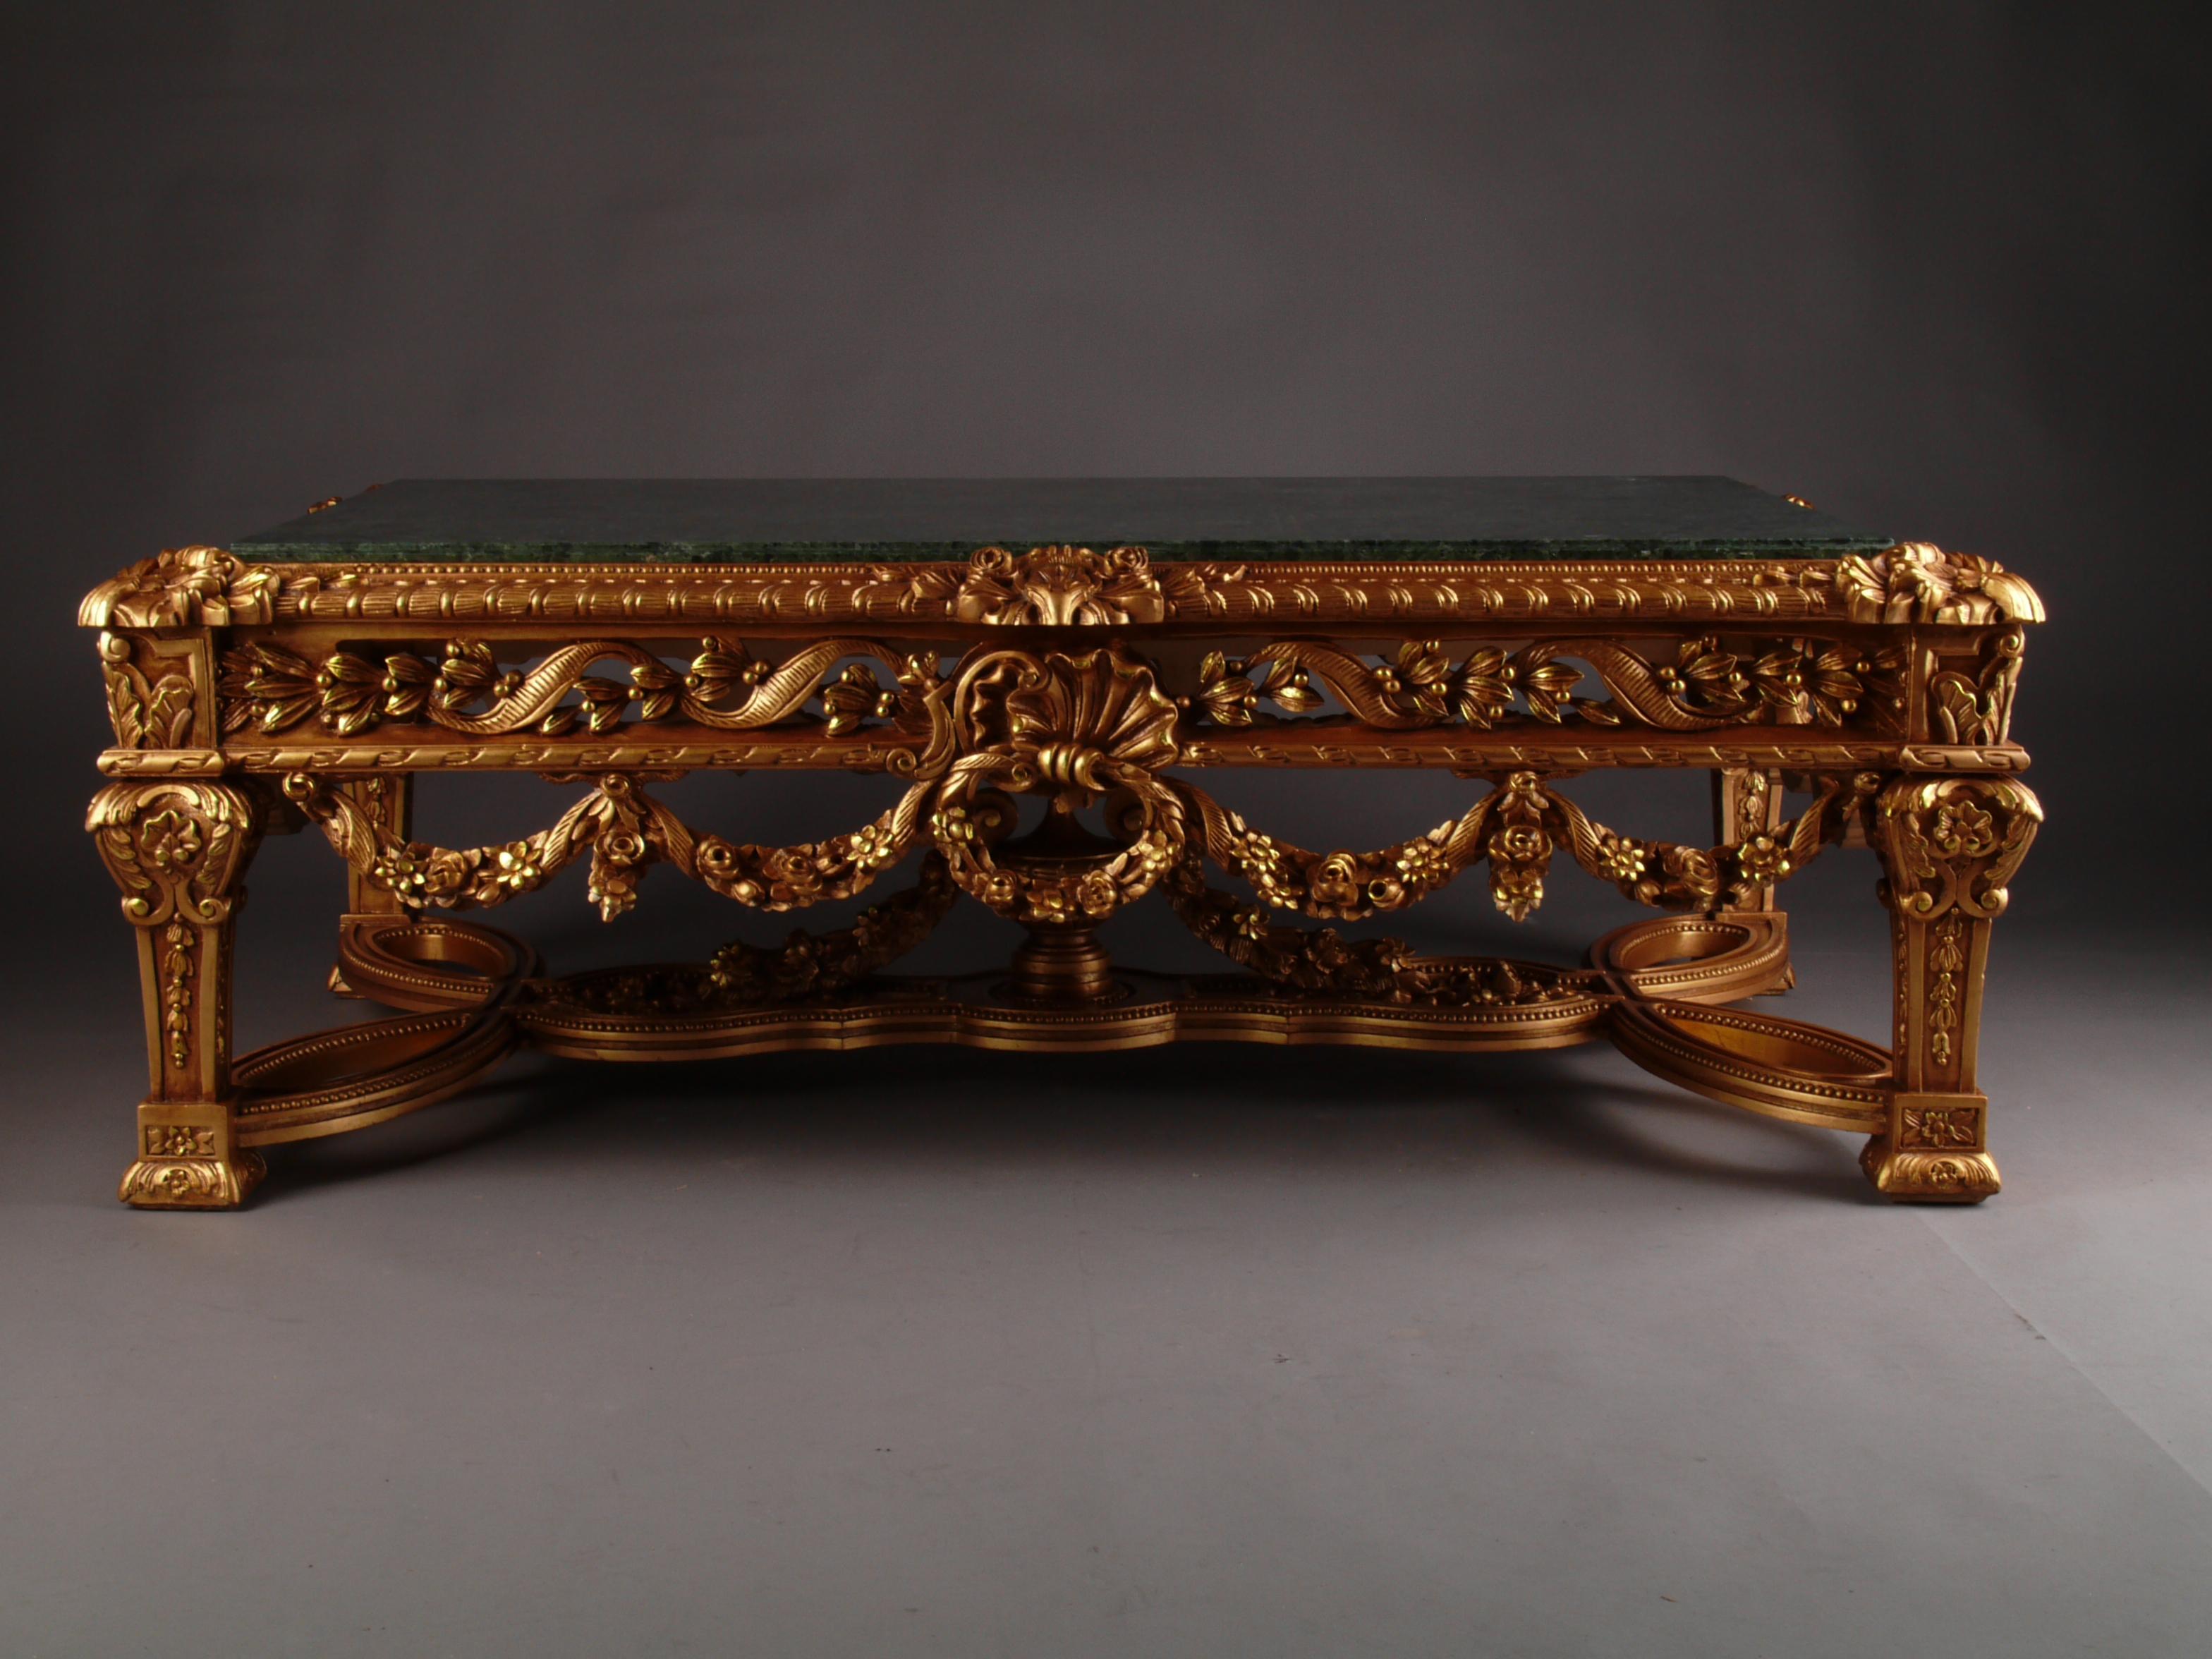 Monumental pomp salon table in Louis XVI style.
Highly valuable solid beechwood carved in finest detail. Colored hand-painted and gilded. On conical legs, connected with X- formed strong carved wood middle bars .With garland ornamented frame-base.